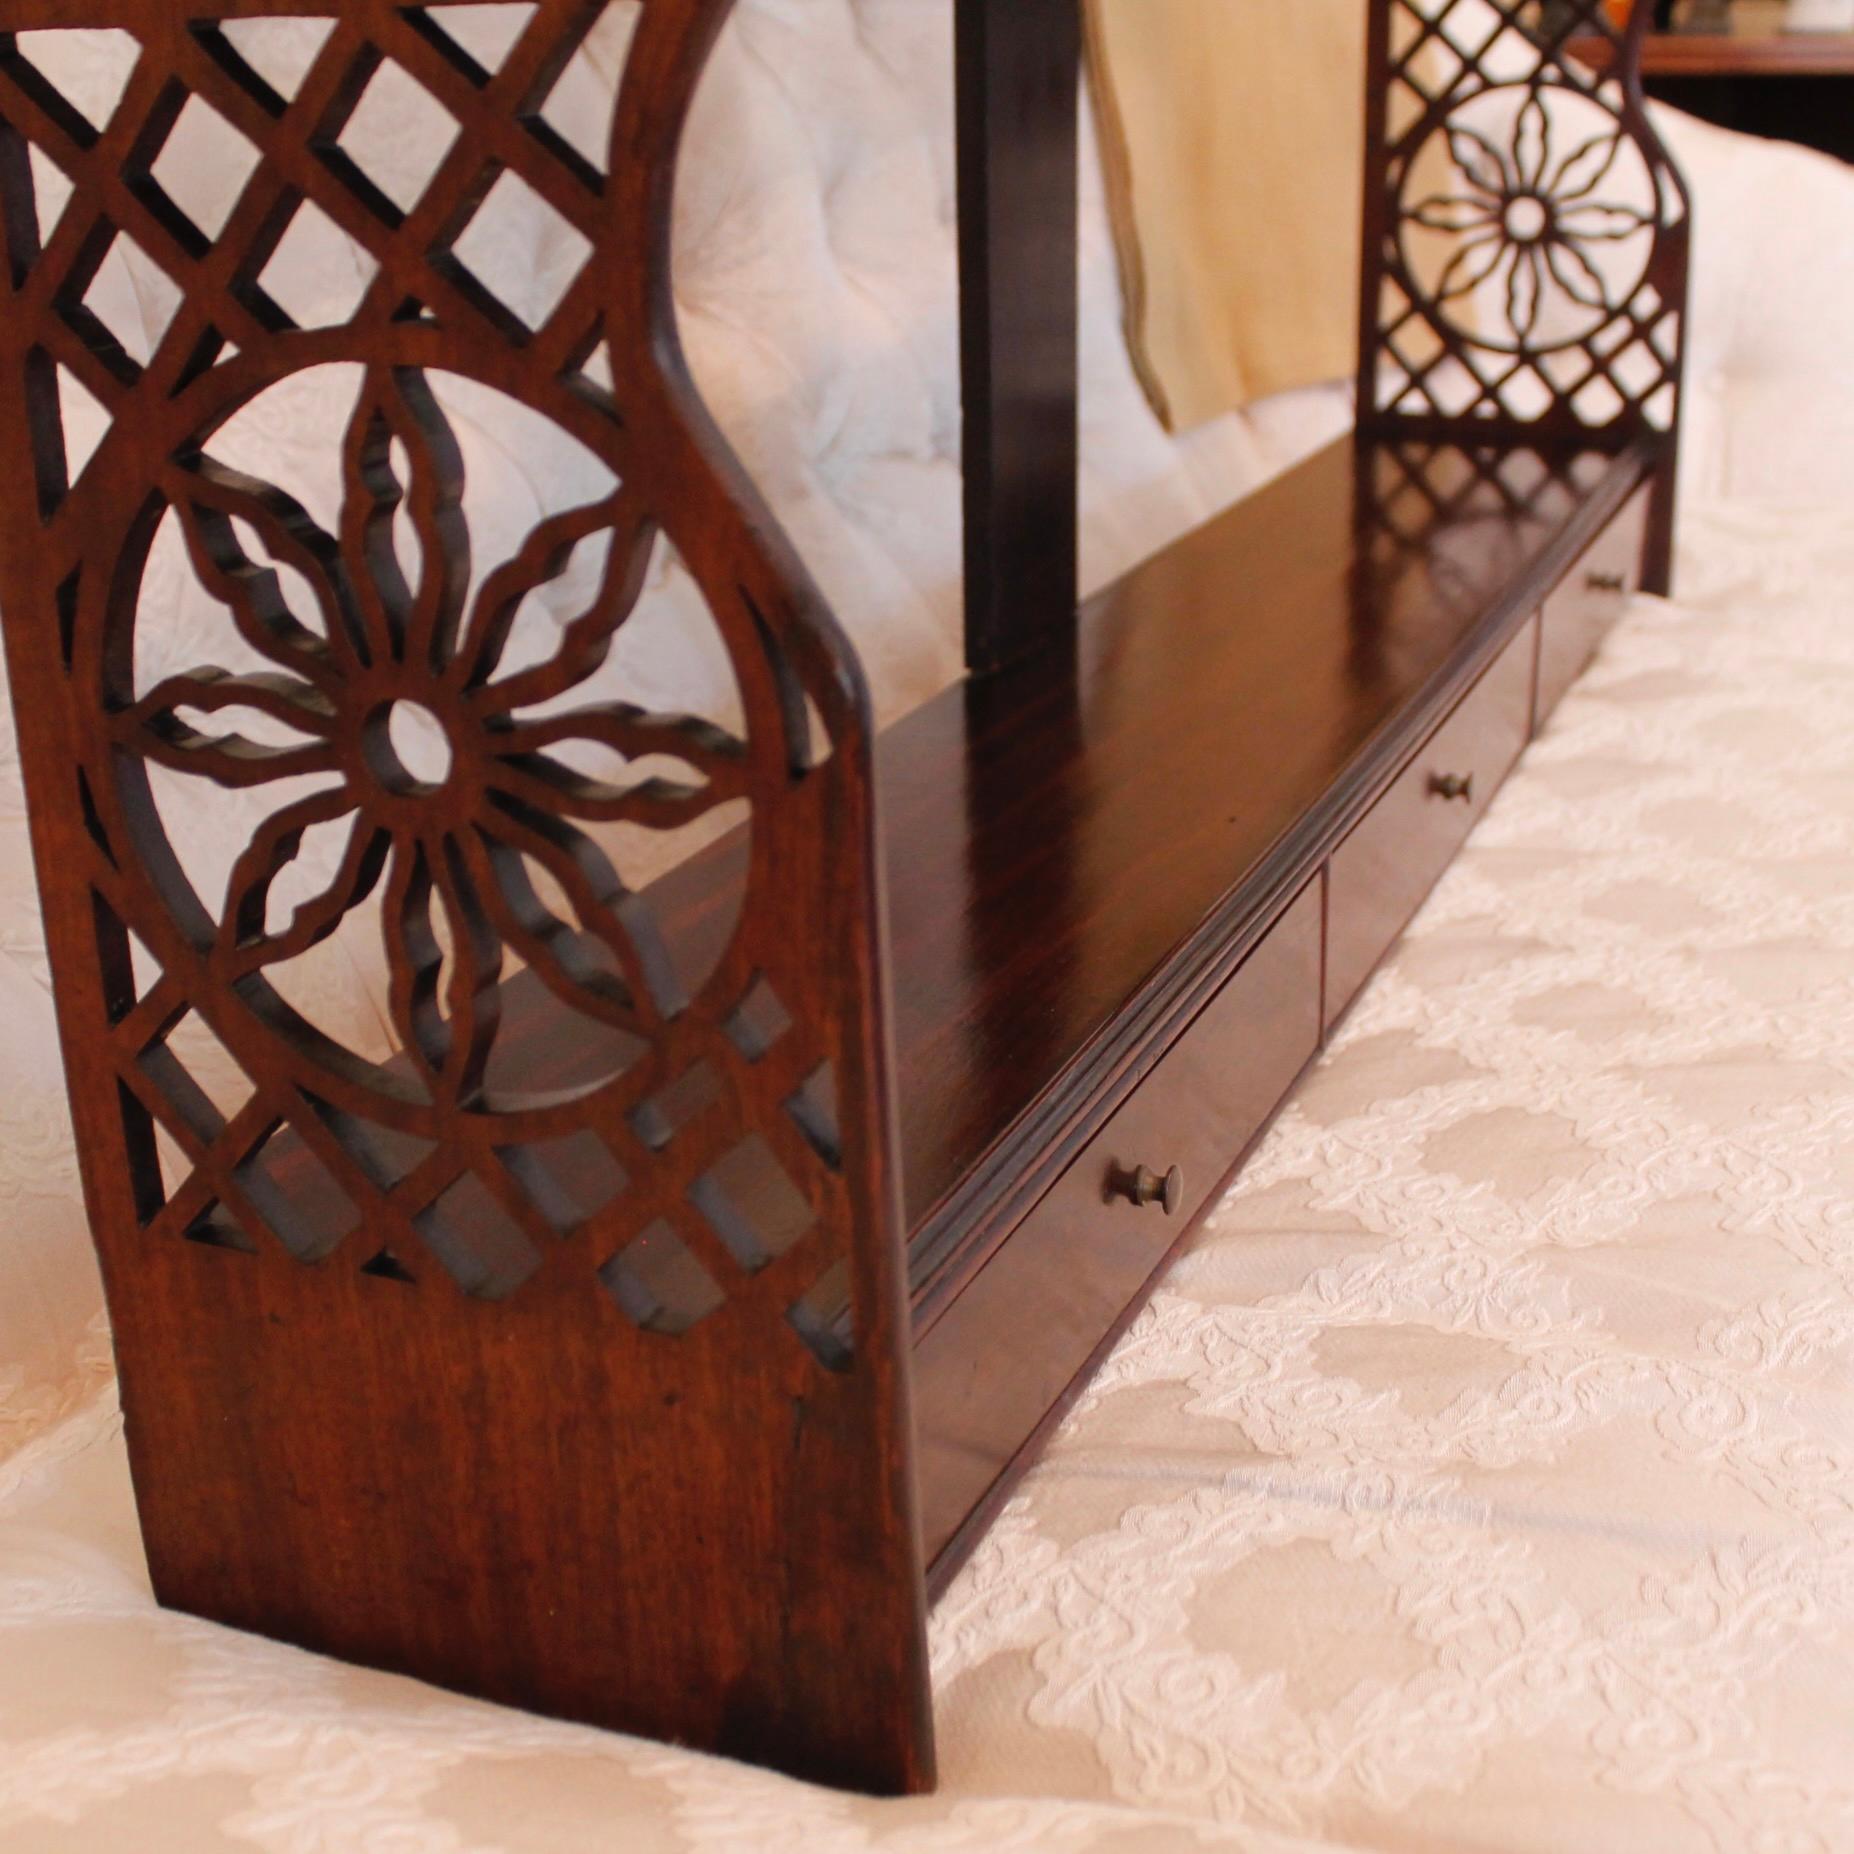 Large George III Period Chinese Chippendale Mahogany Fretwork Hanging Shelf In Good Condition For Sale In Free Union, VA